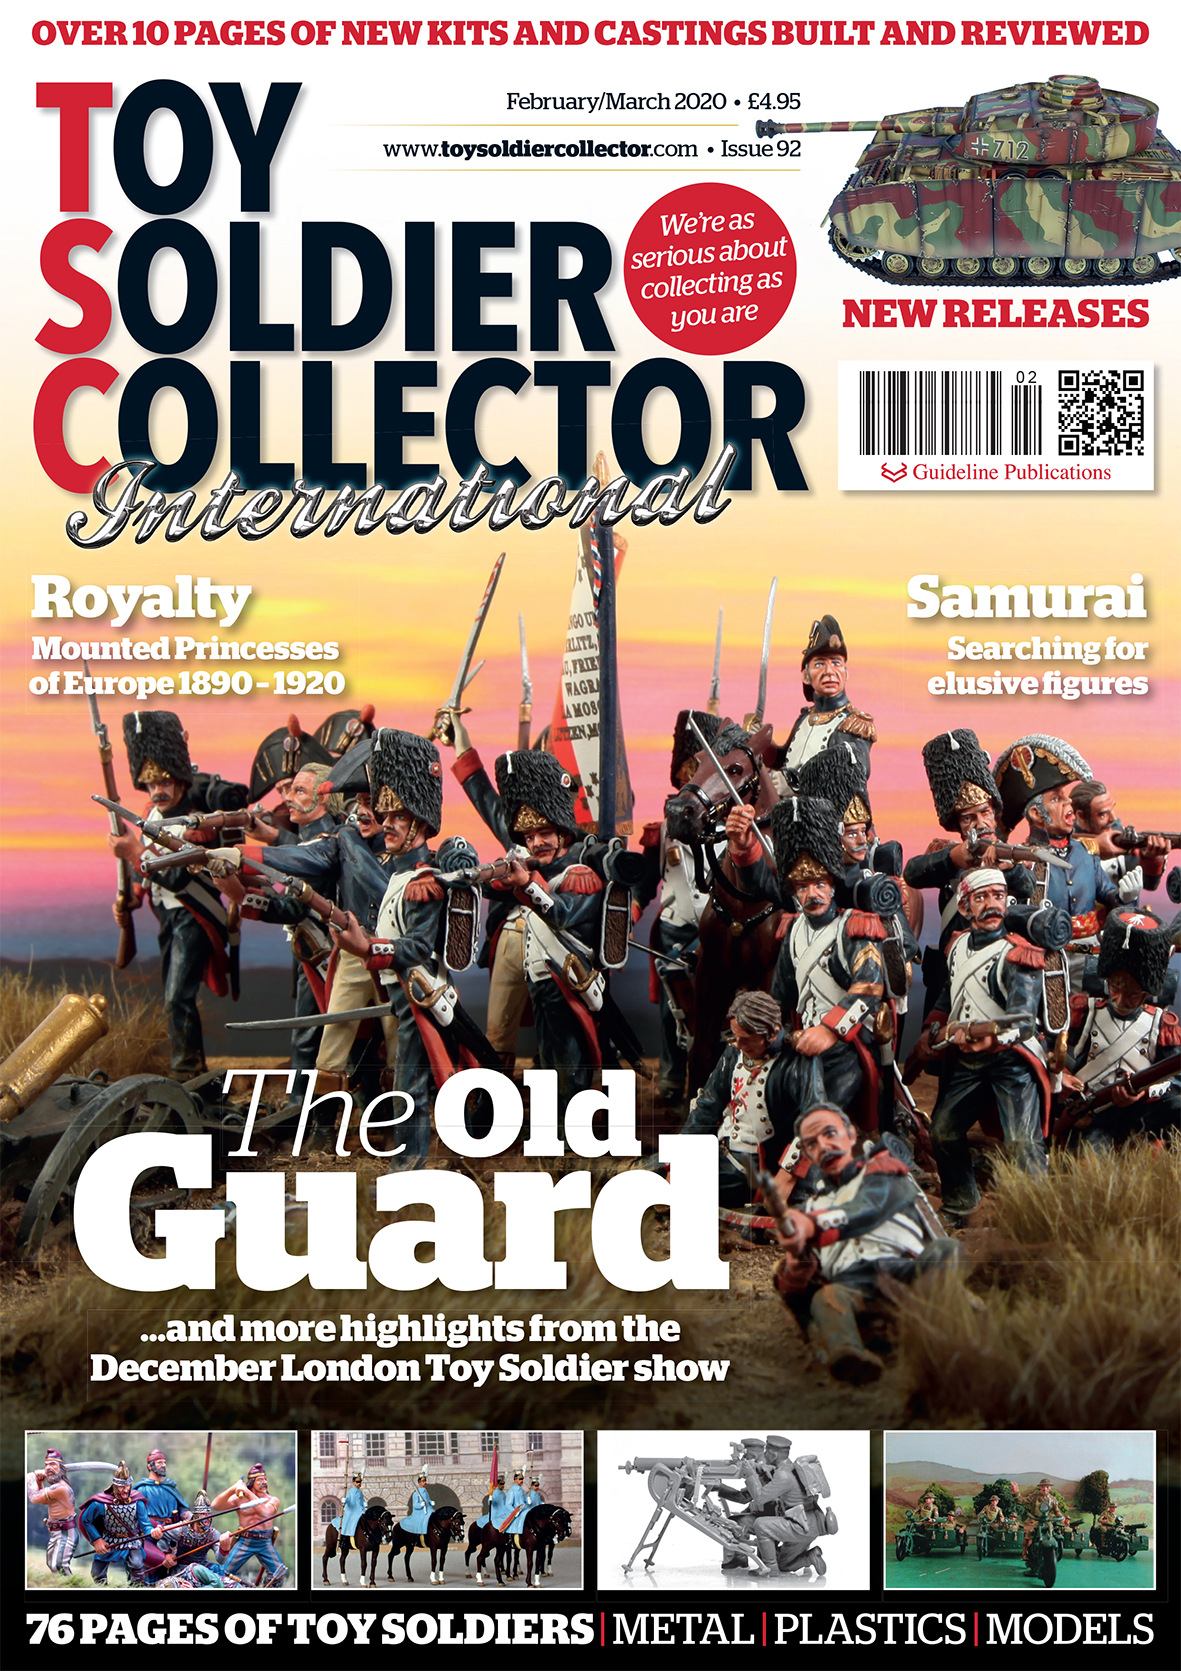 Guideline Publications Toy Soldier Collector #92 Feb/March 2020 Issue 92 